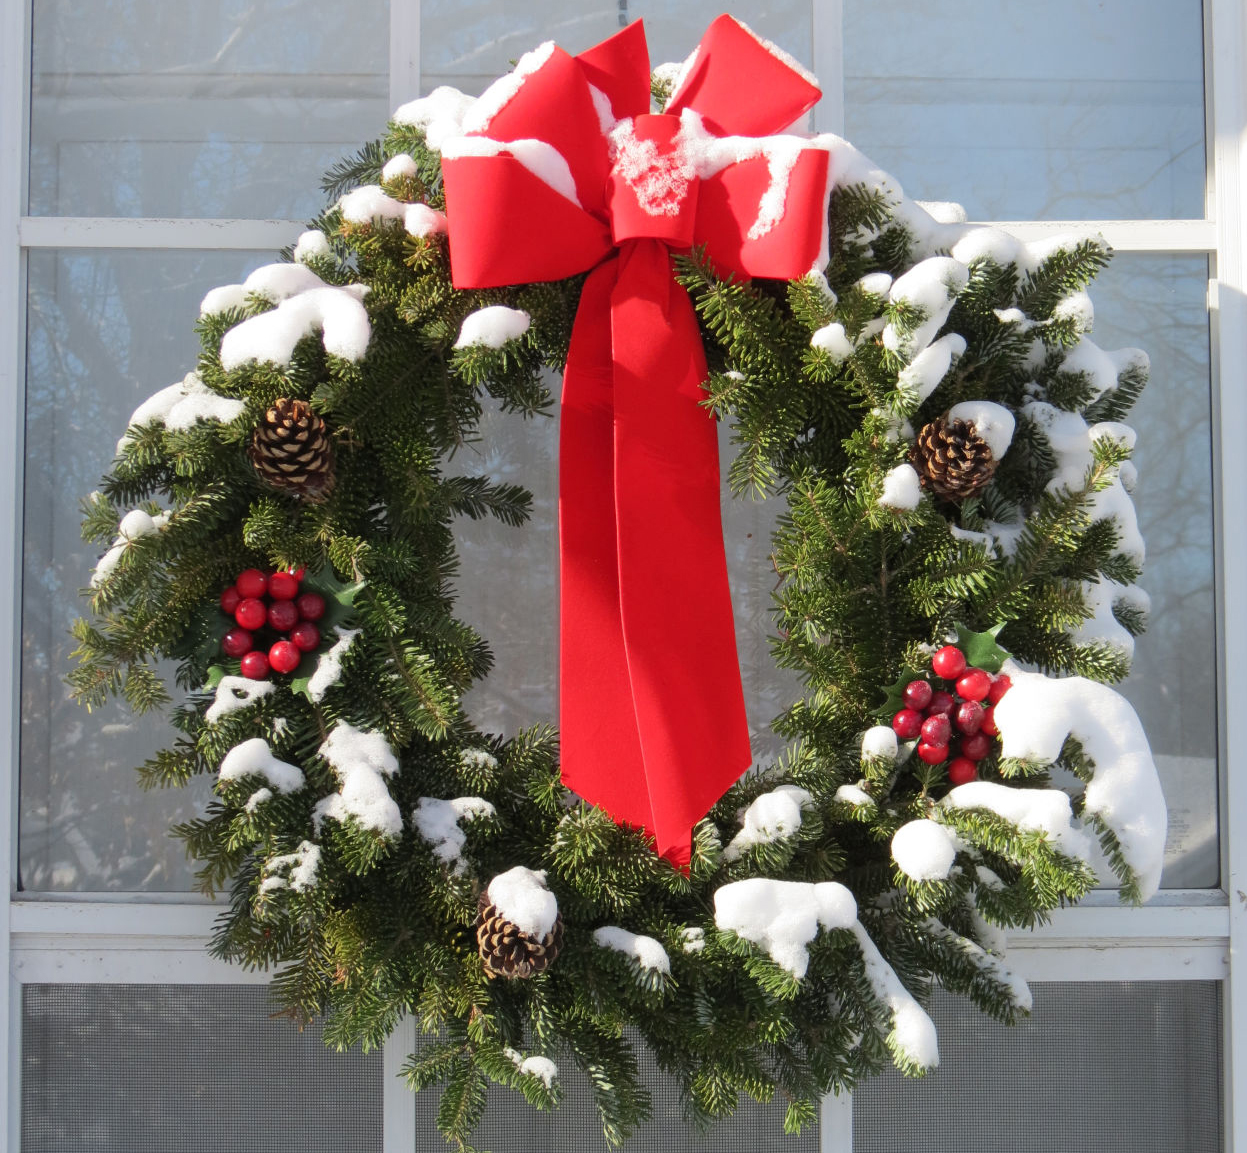 A homemade wreath can really brighten a holiday gathering and is not difficult to make. (Courtesy photo.)